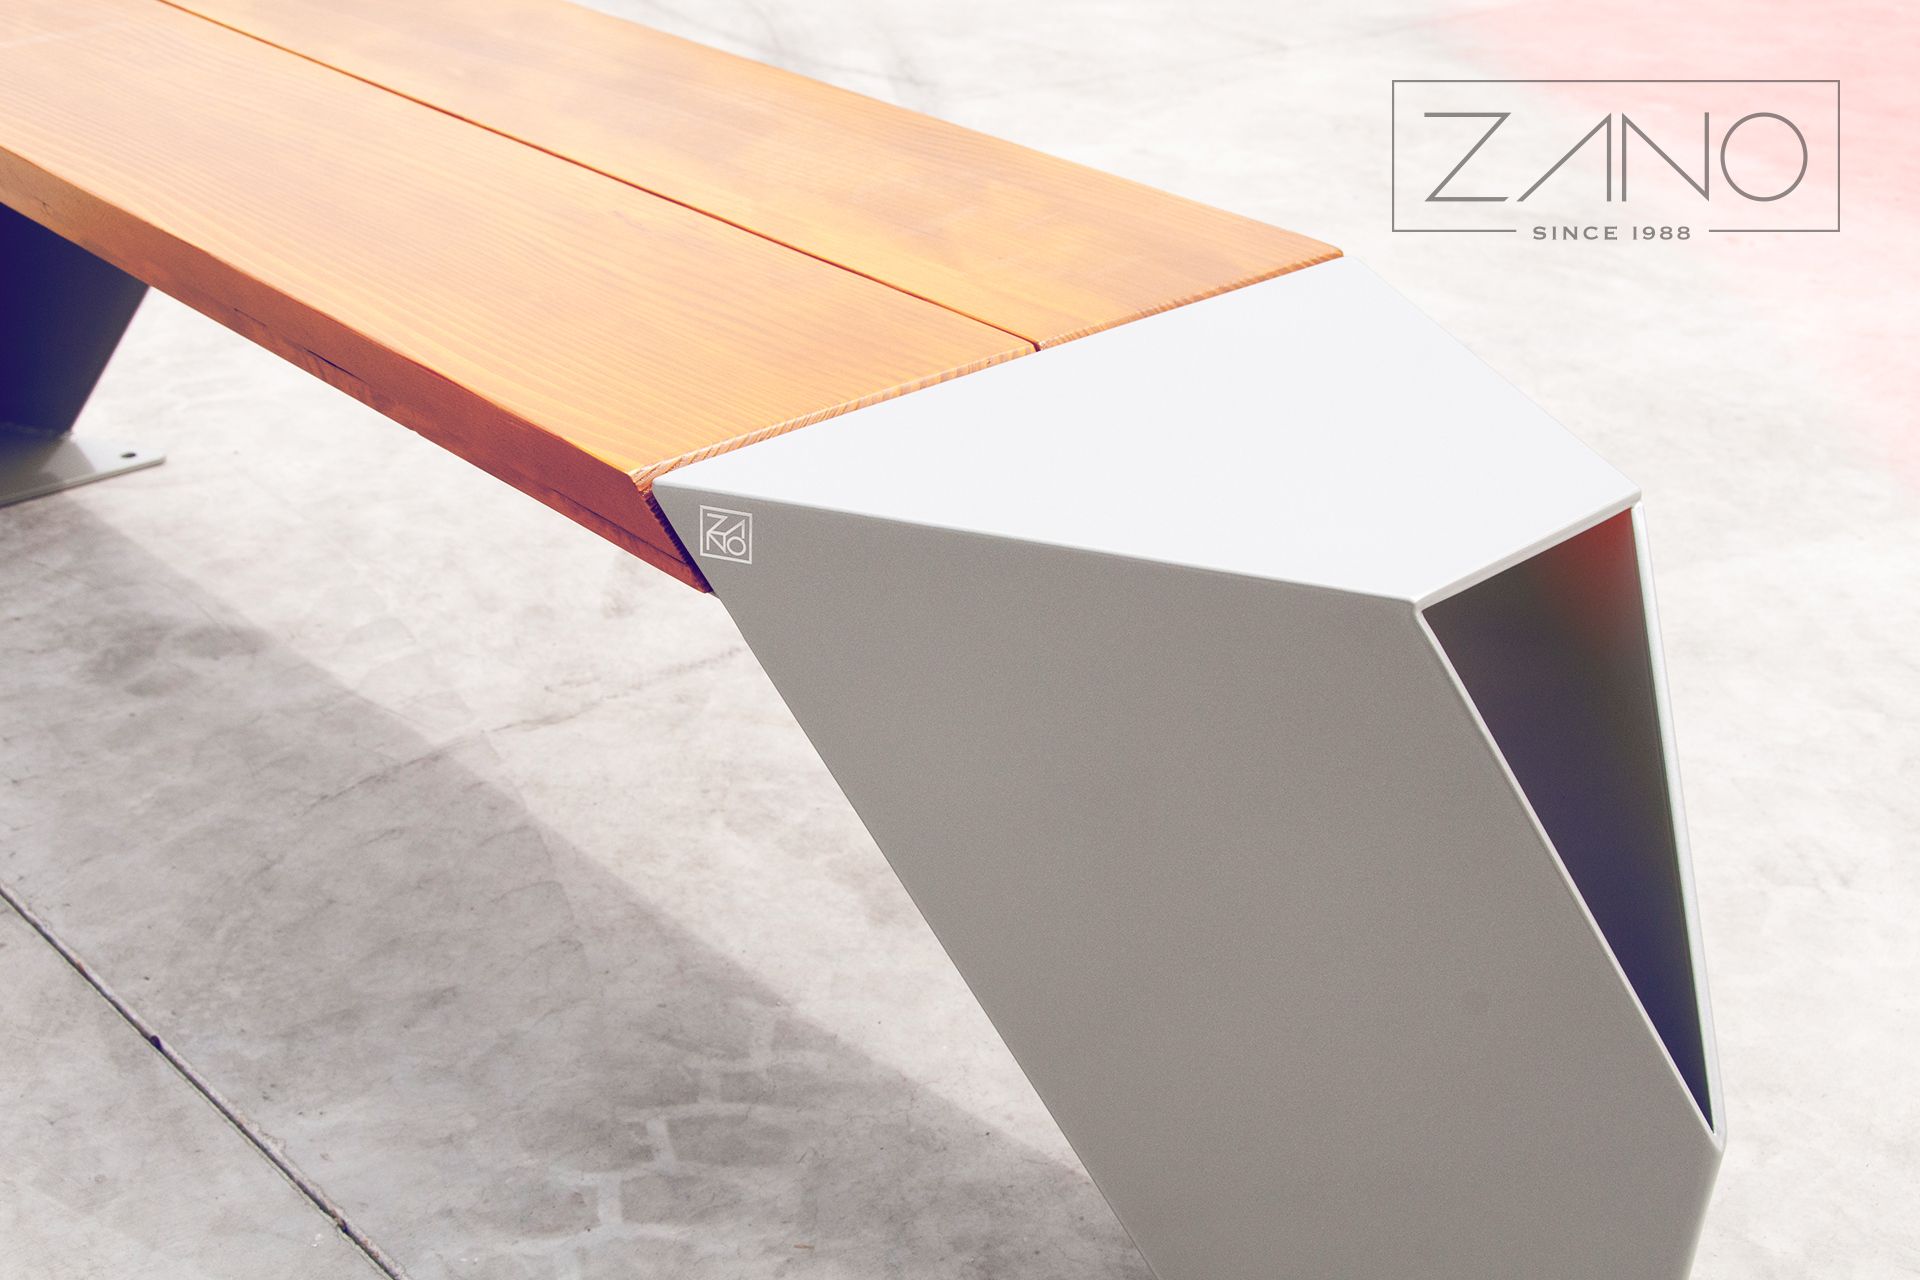 Contemporary street furniture made in Poland